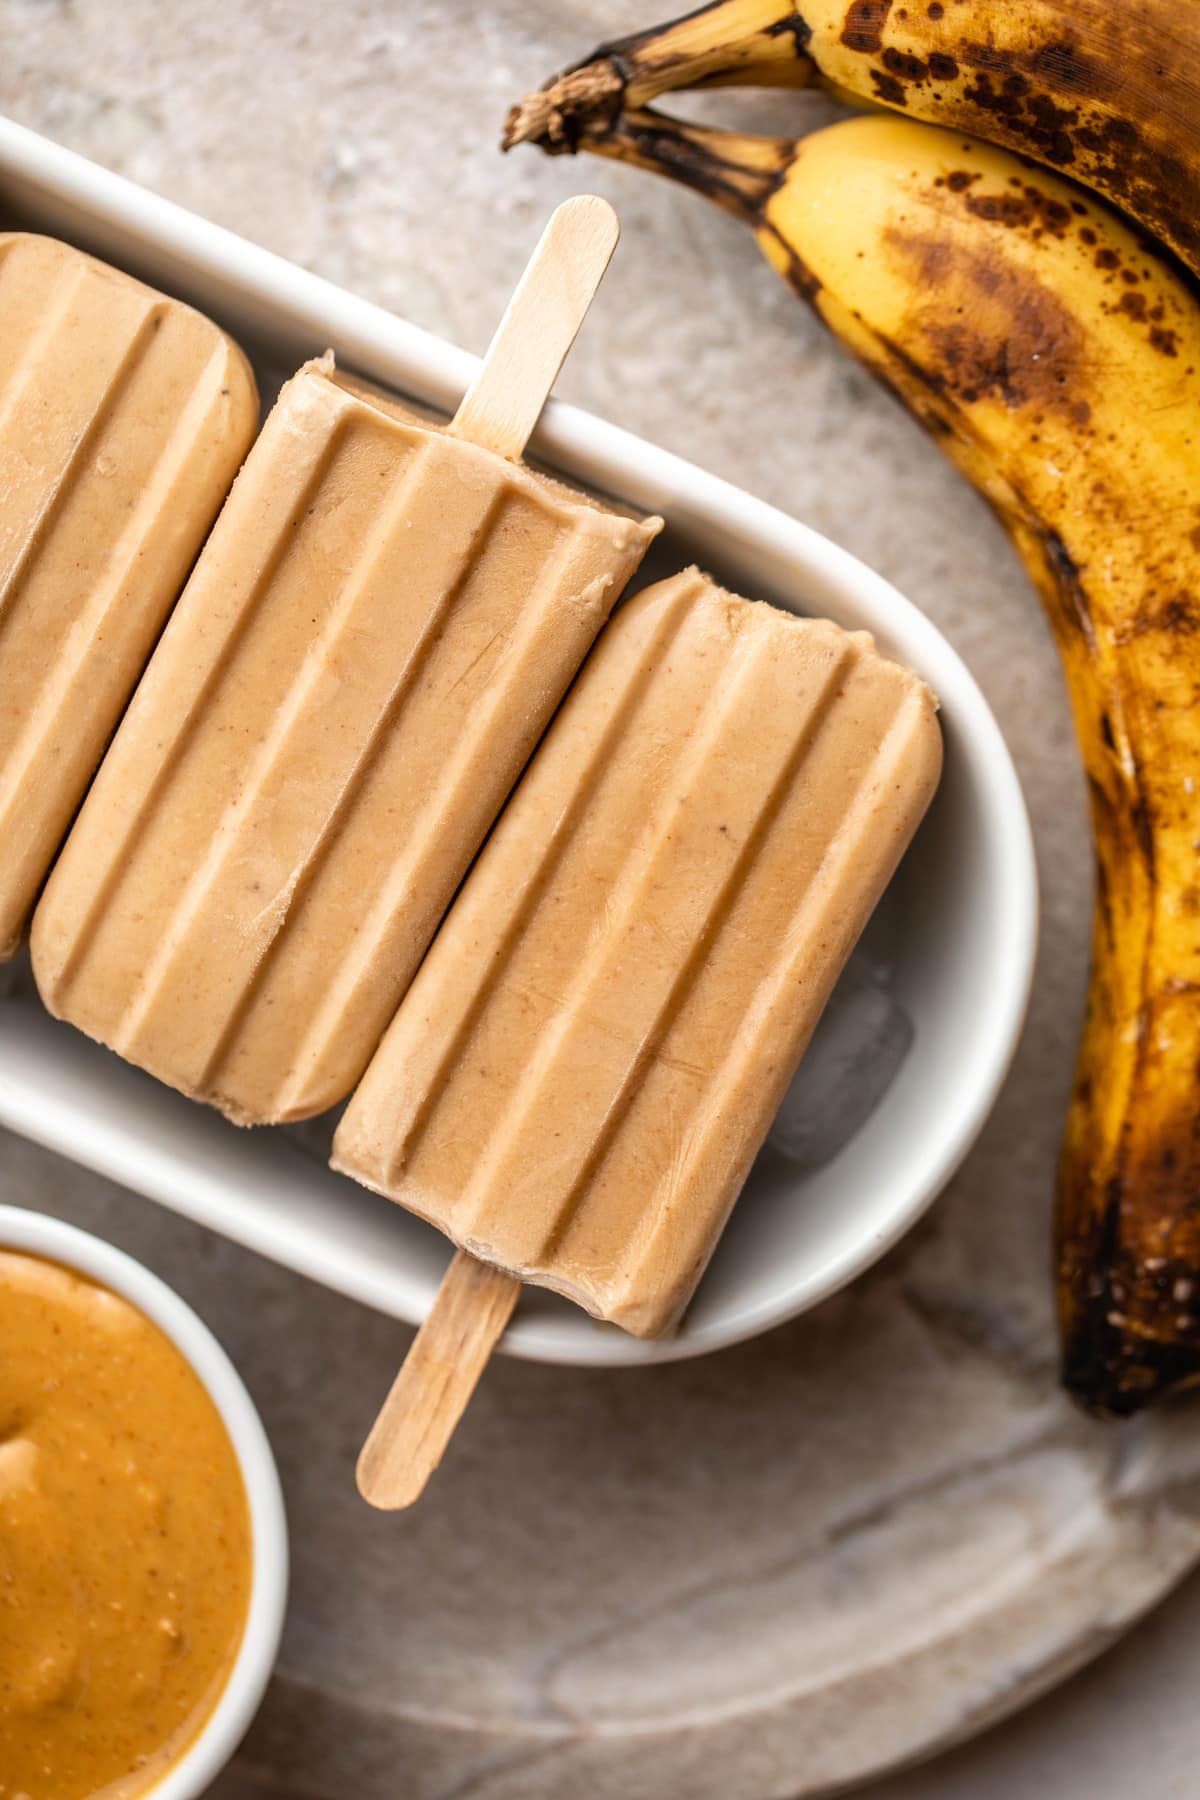 Looking for a way to use your ripe and overripe bananas? Check out this list of 20 amazing vegan banana recipes and monkey around in the kitchen! #veganbananarecipes #veganbananarecipeshealthy #veganbananarecipeseasy #veganbananarecipesglutenfree #veganbananarecipesoverripe #bohemianvegankitchen 